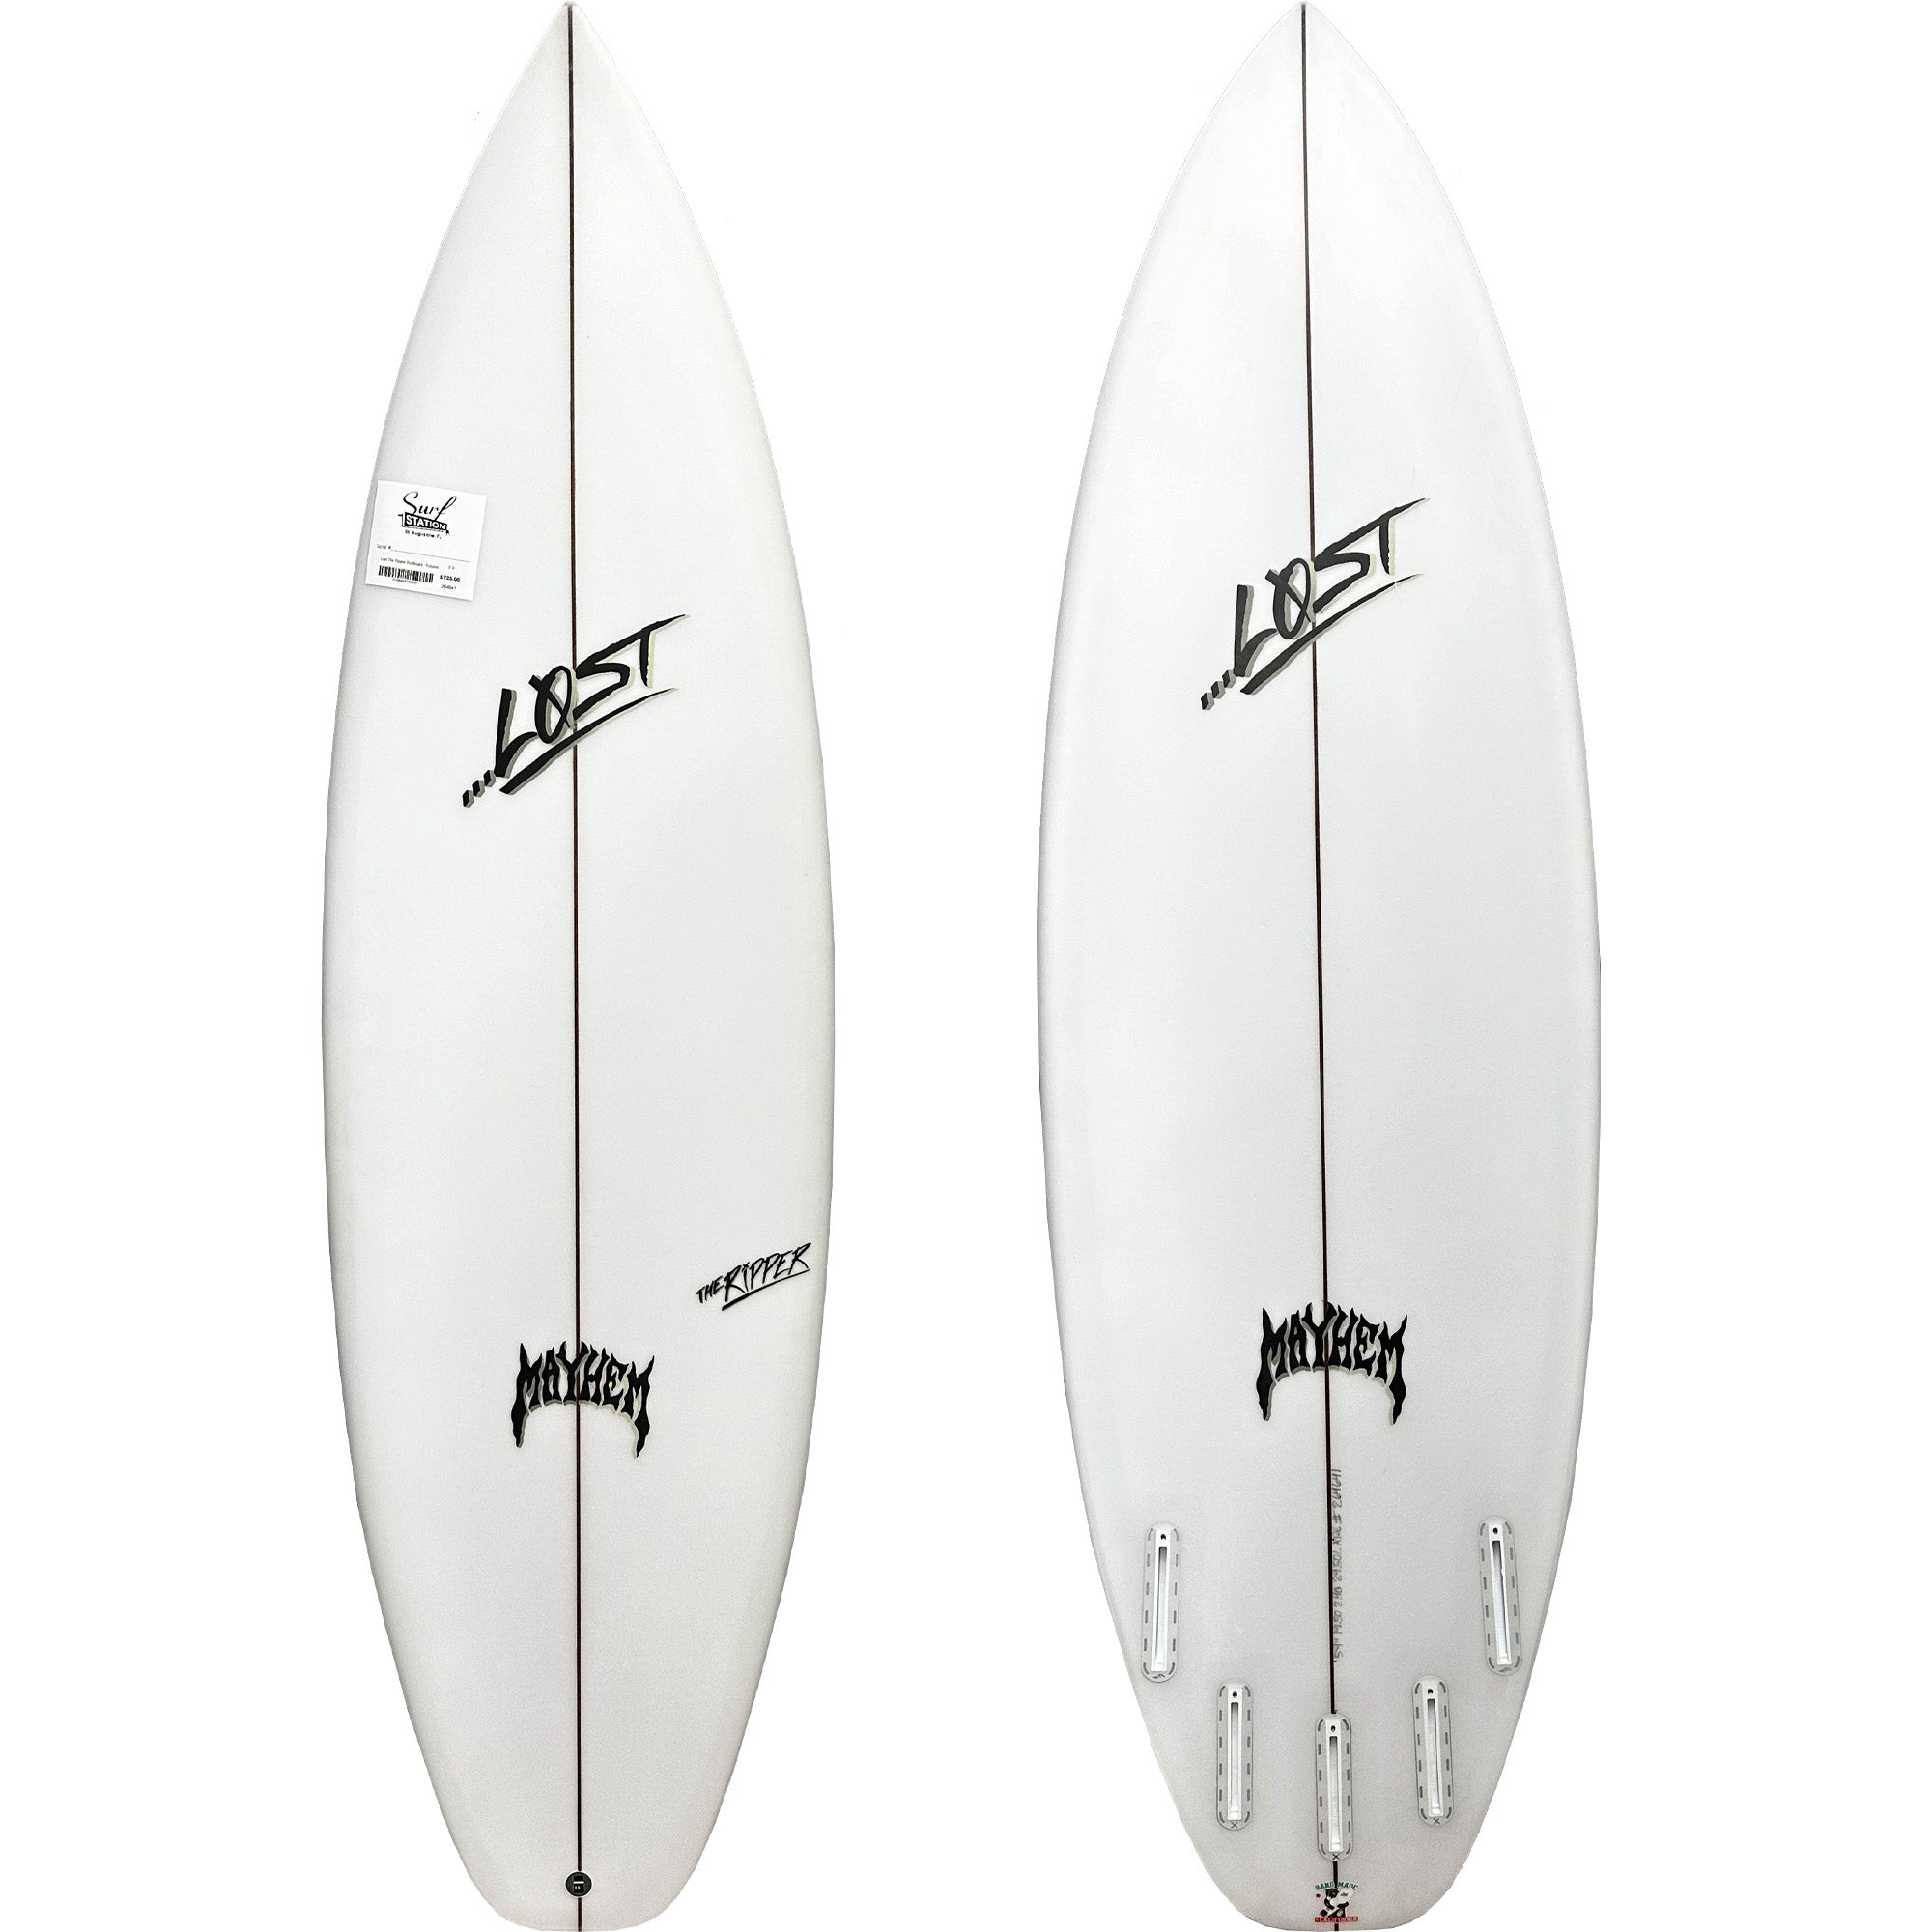 Lost The Ripper Surfboard - Futures